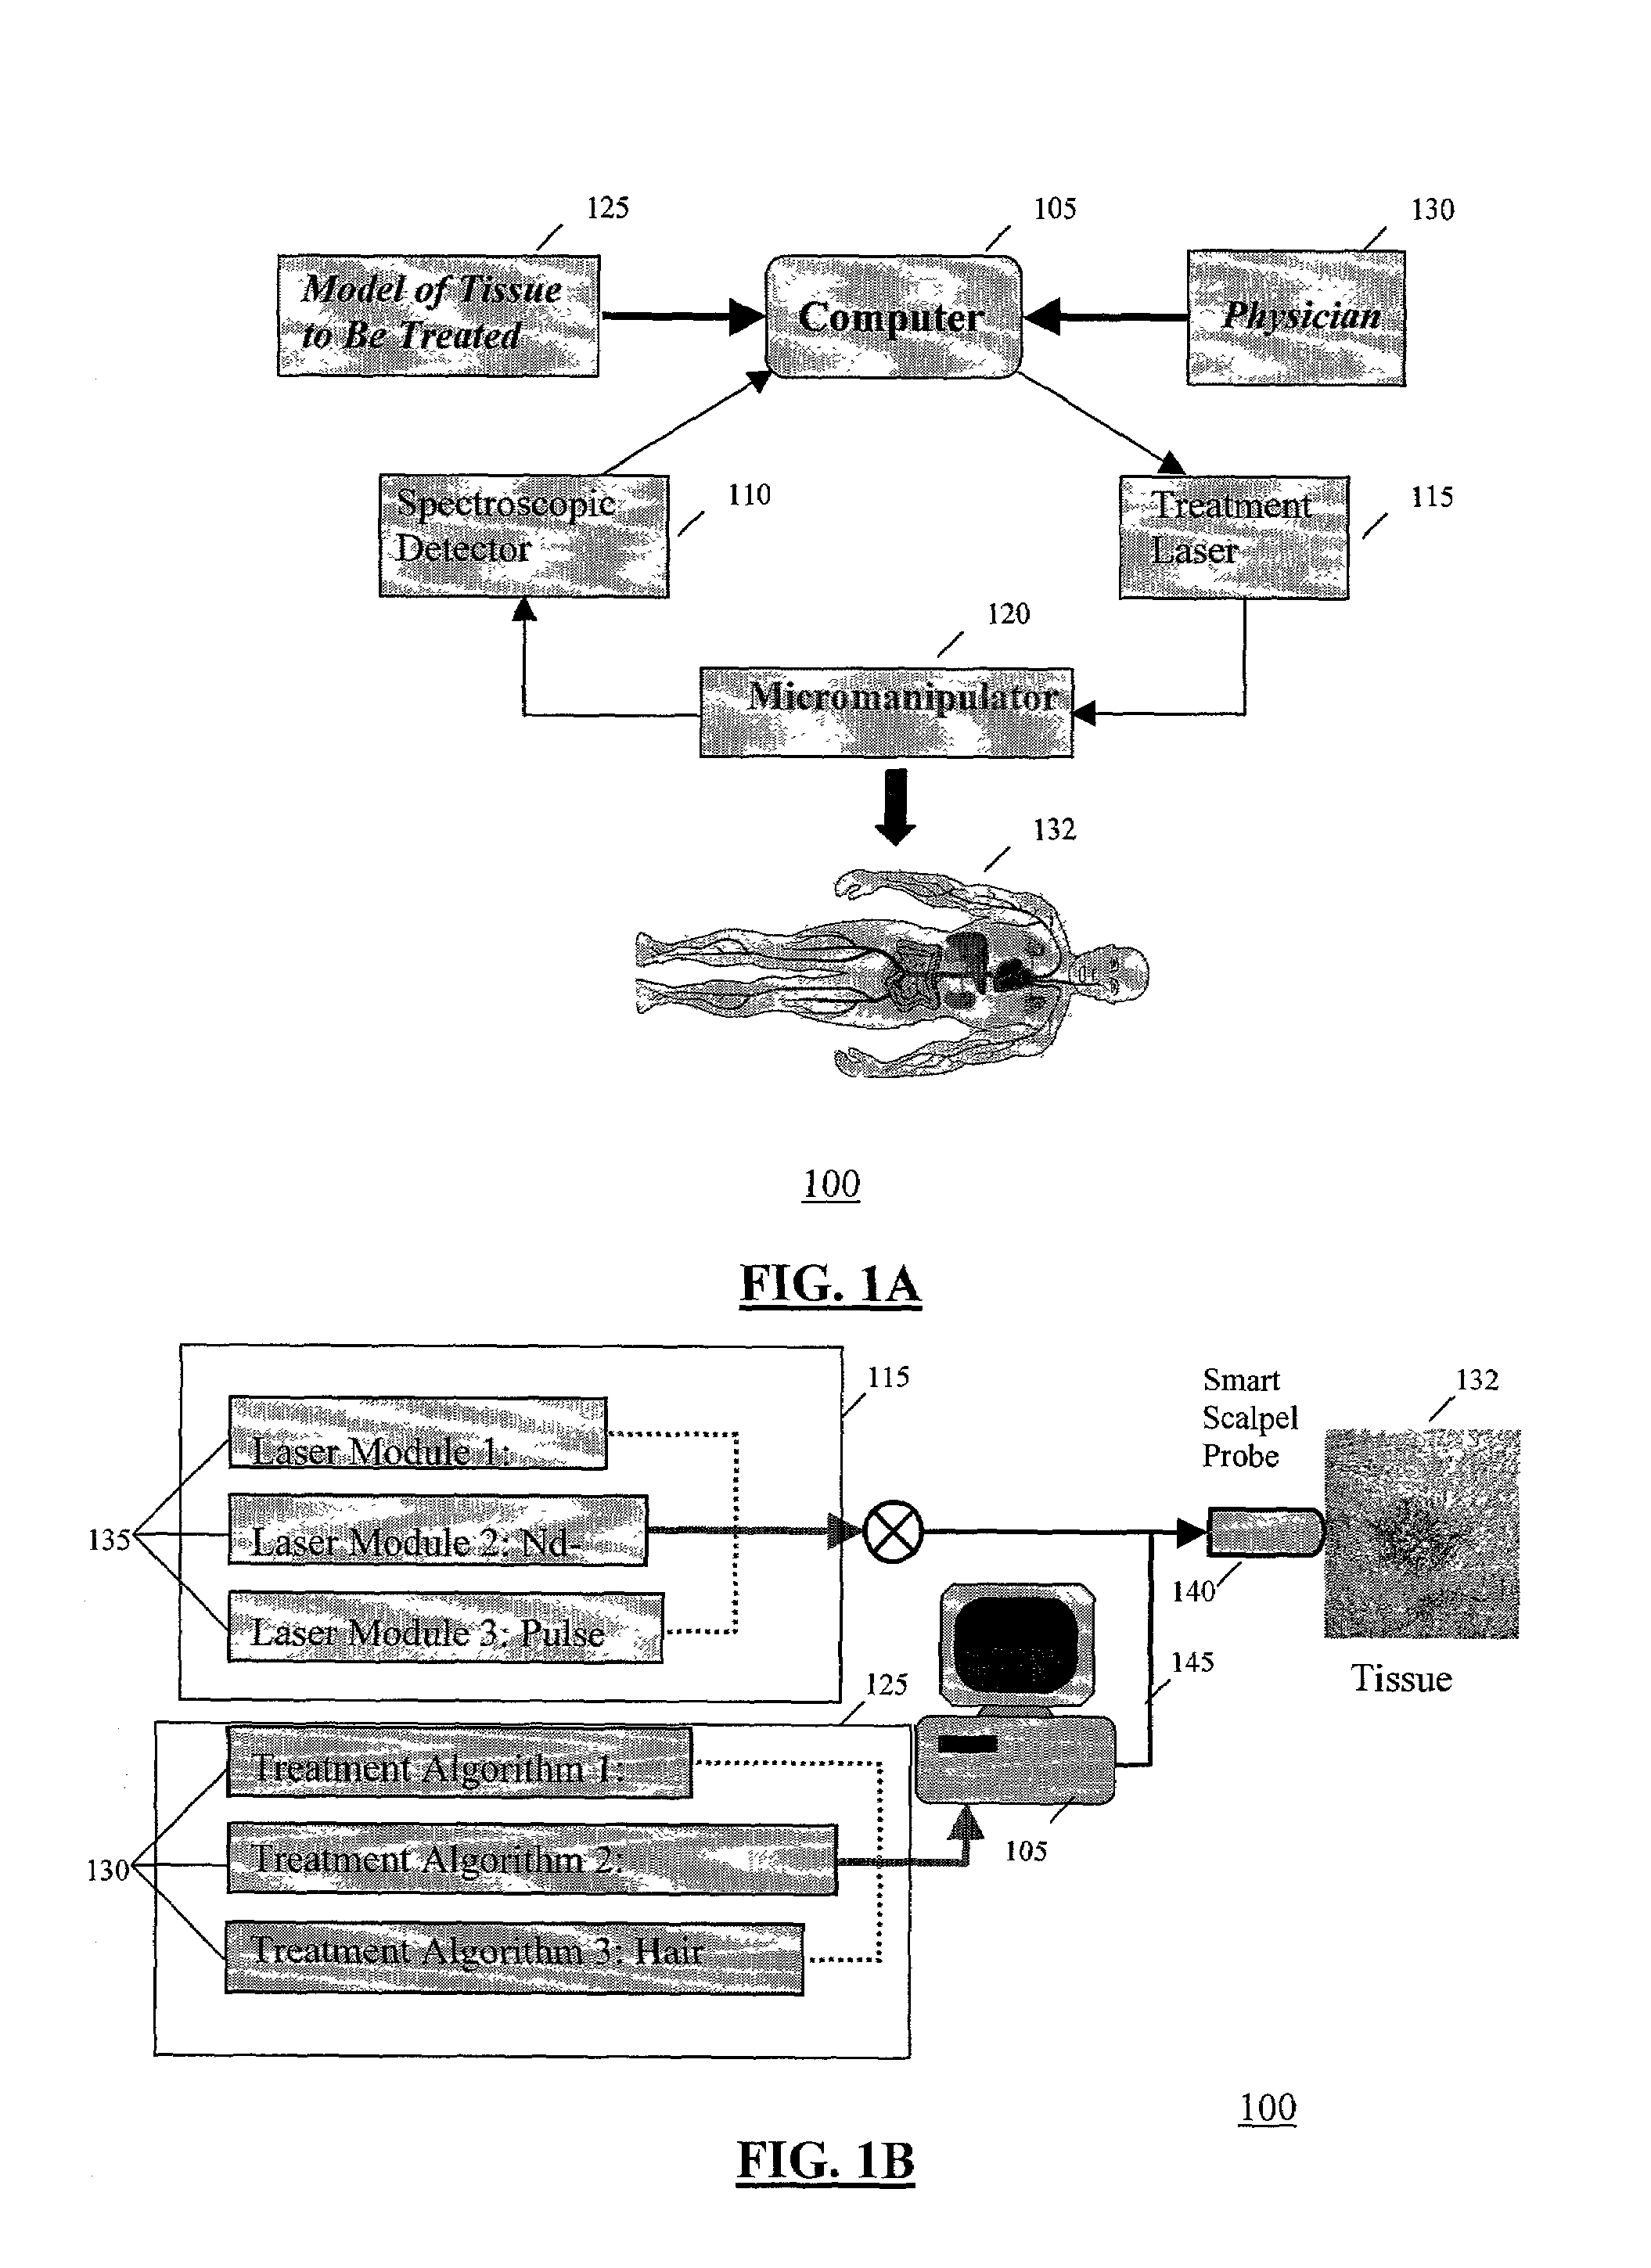 Apparatus and method for laser treatment with spectroscopic feedback